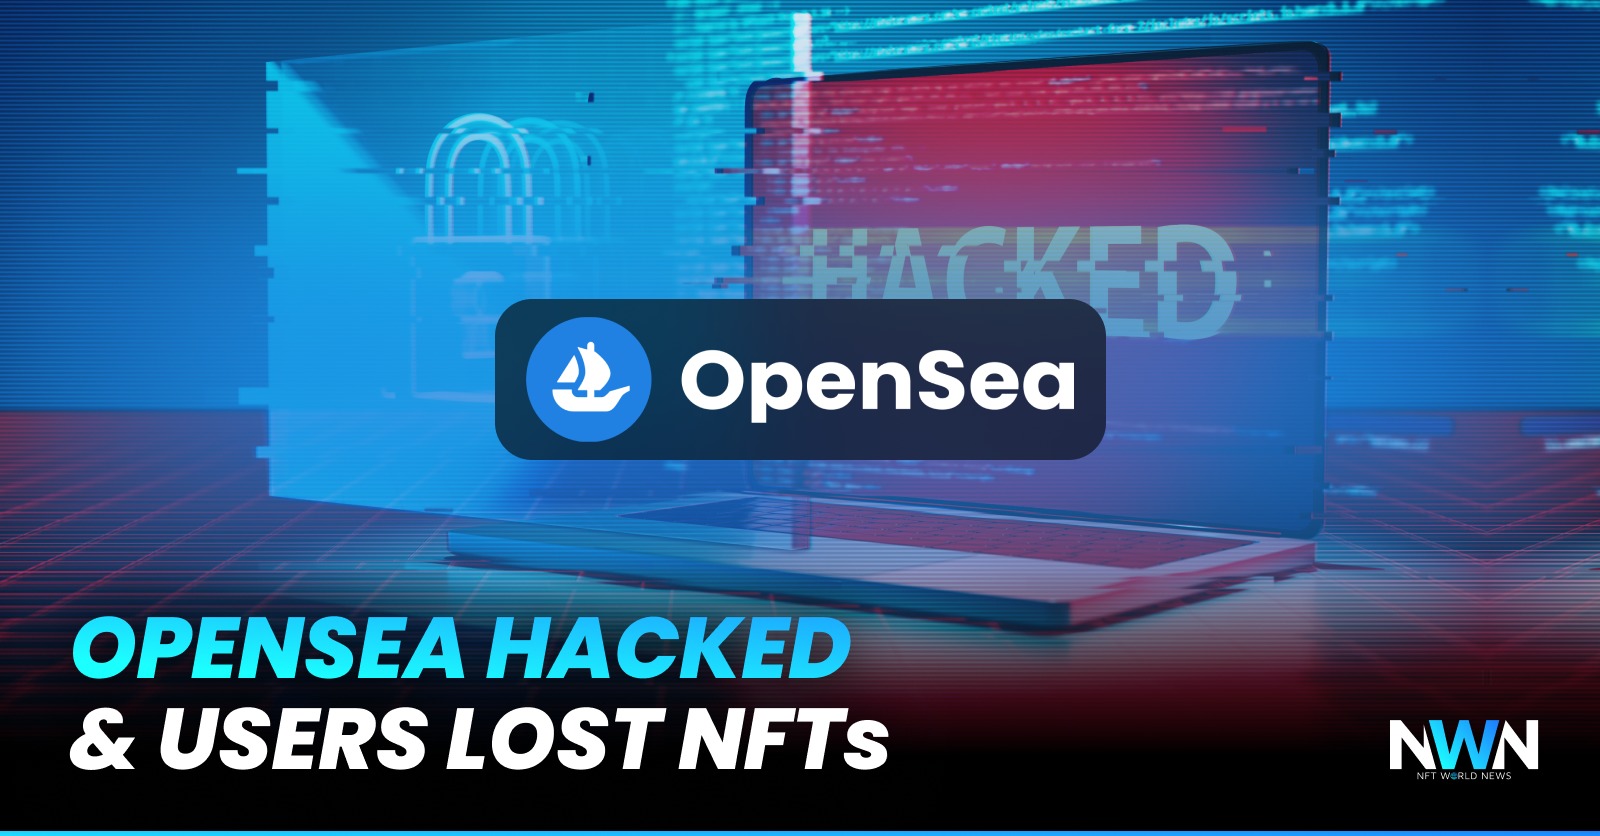 Opensea Hacked And Users Lost NFTs